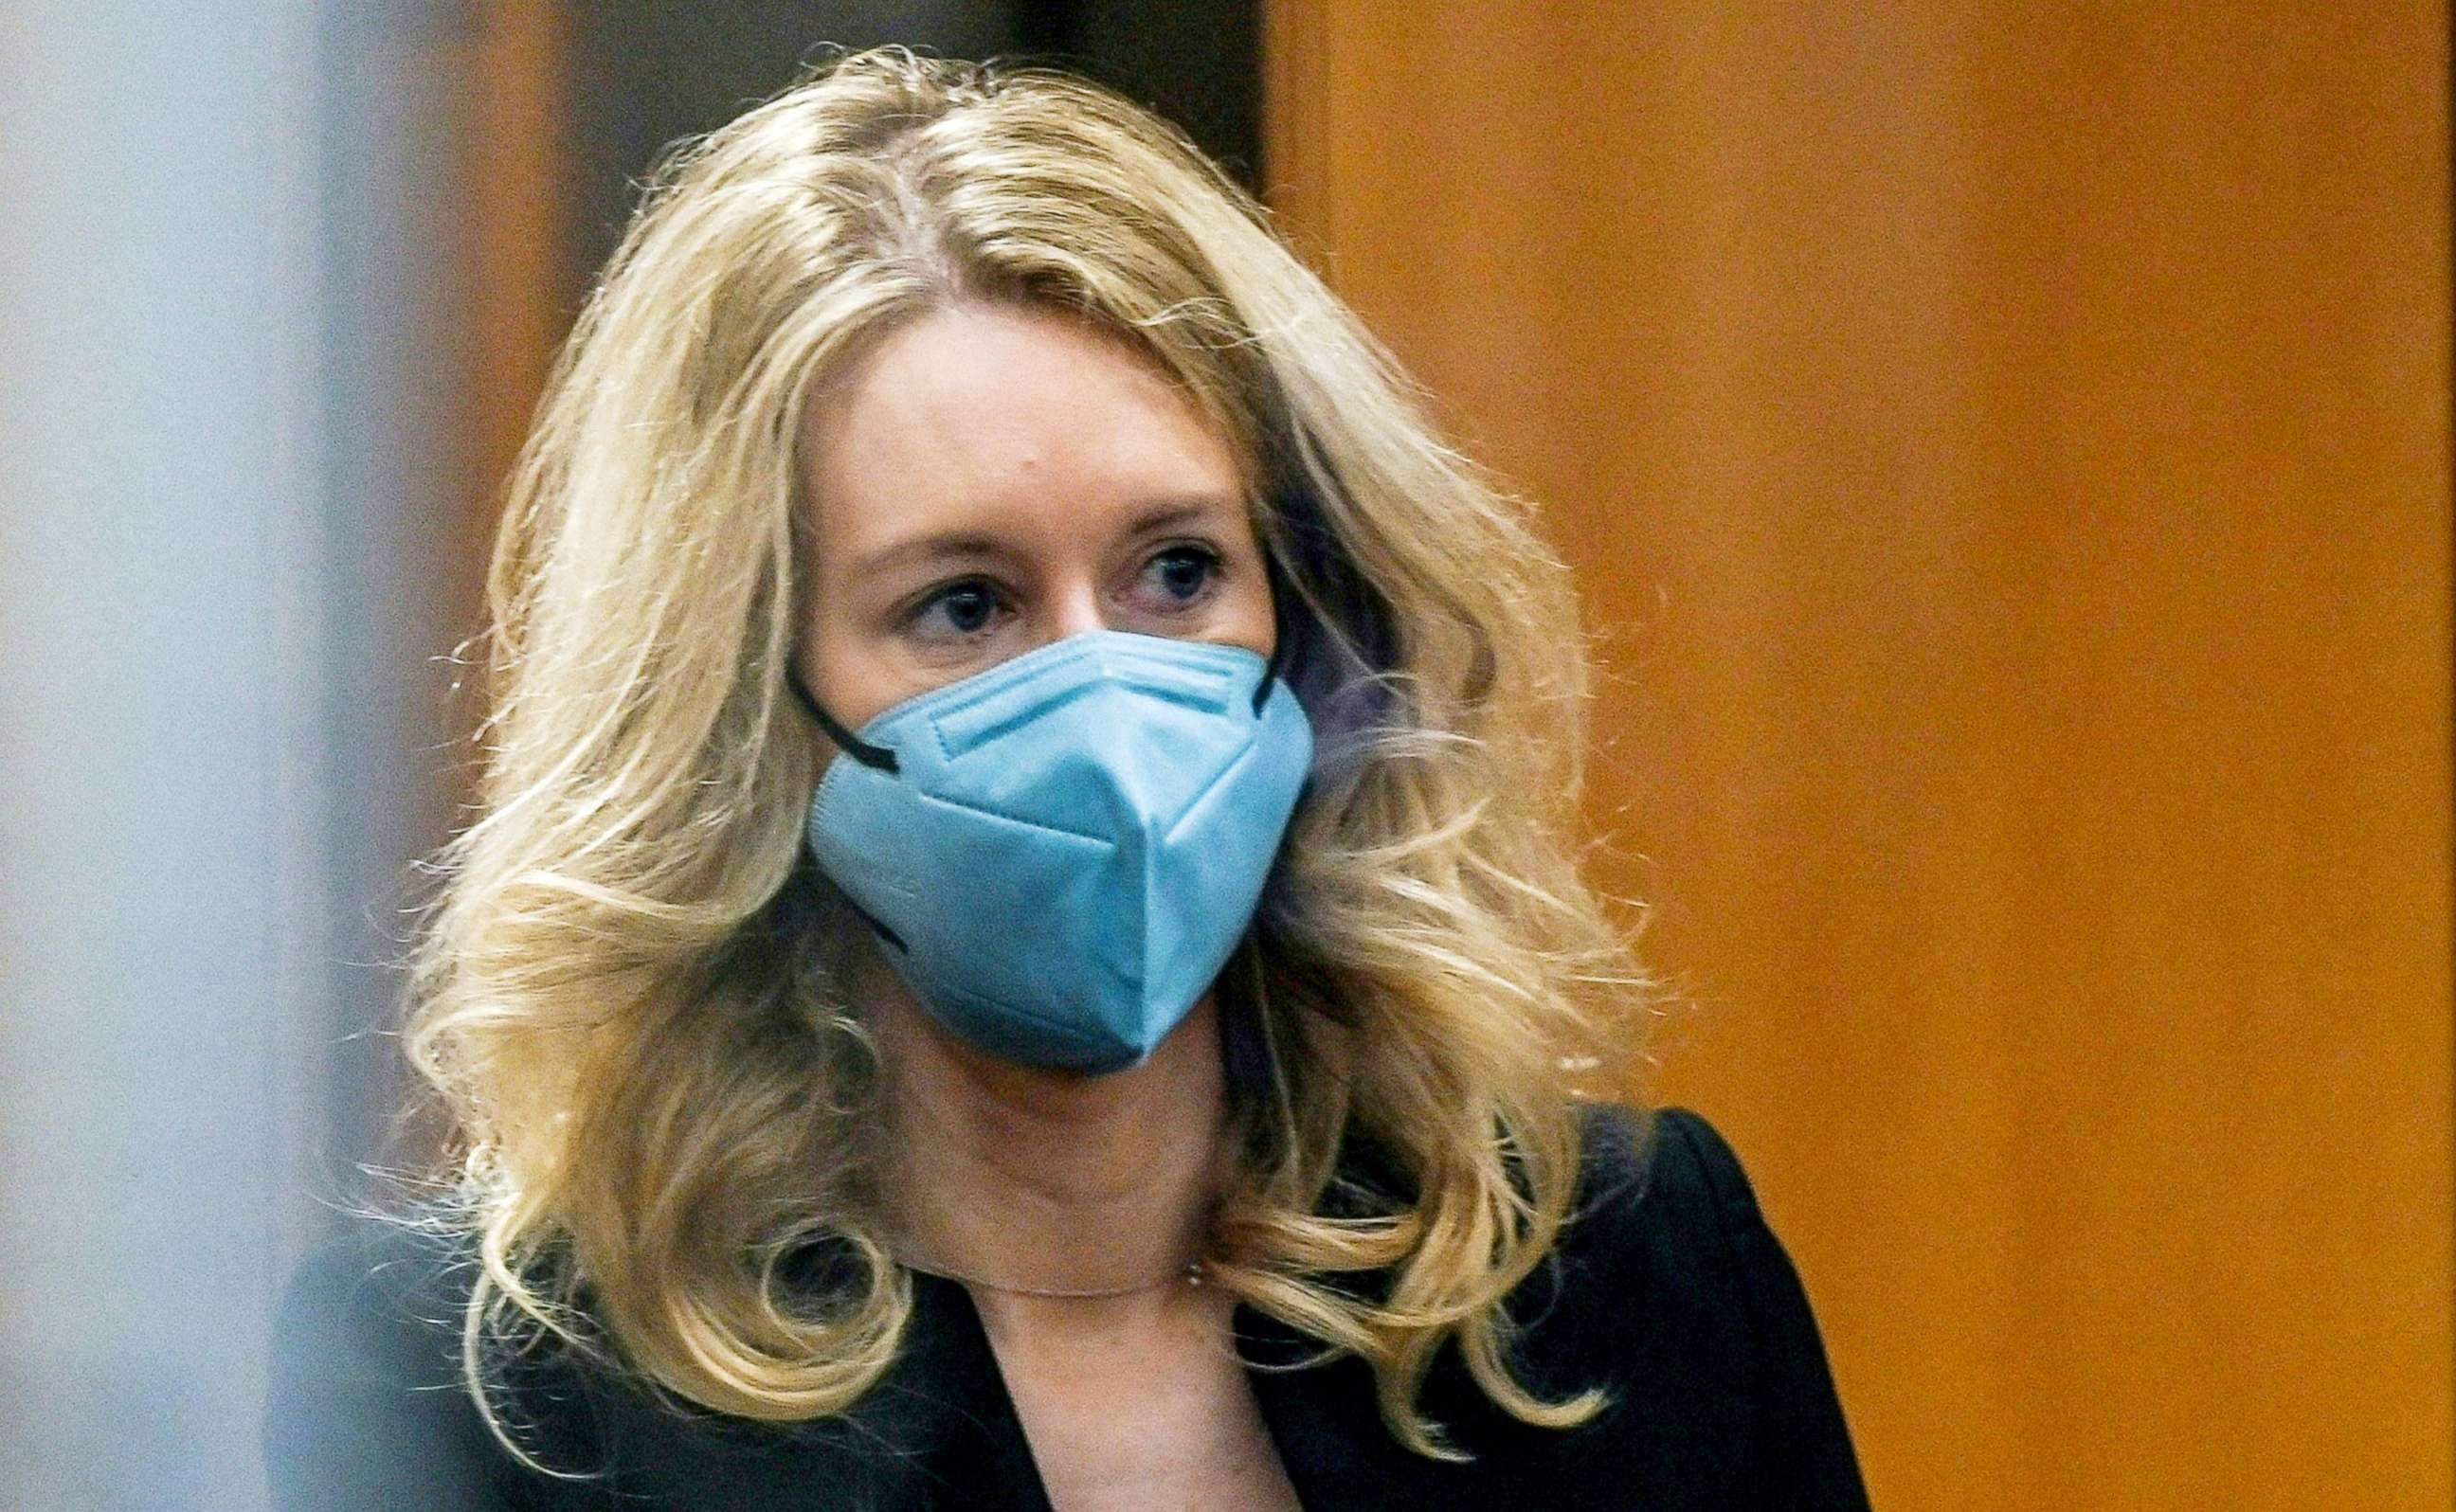 PHOTO: Former Theranos founder and CEO Elizabeth Holmes goes through security after arriving for court at the Robert F. Peckham Federal Building in San Jose, Calif., Nov. 22, 2021.